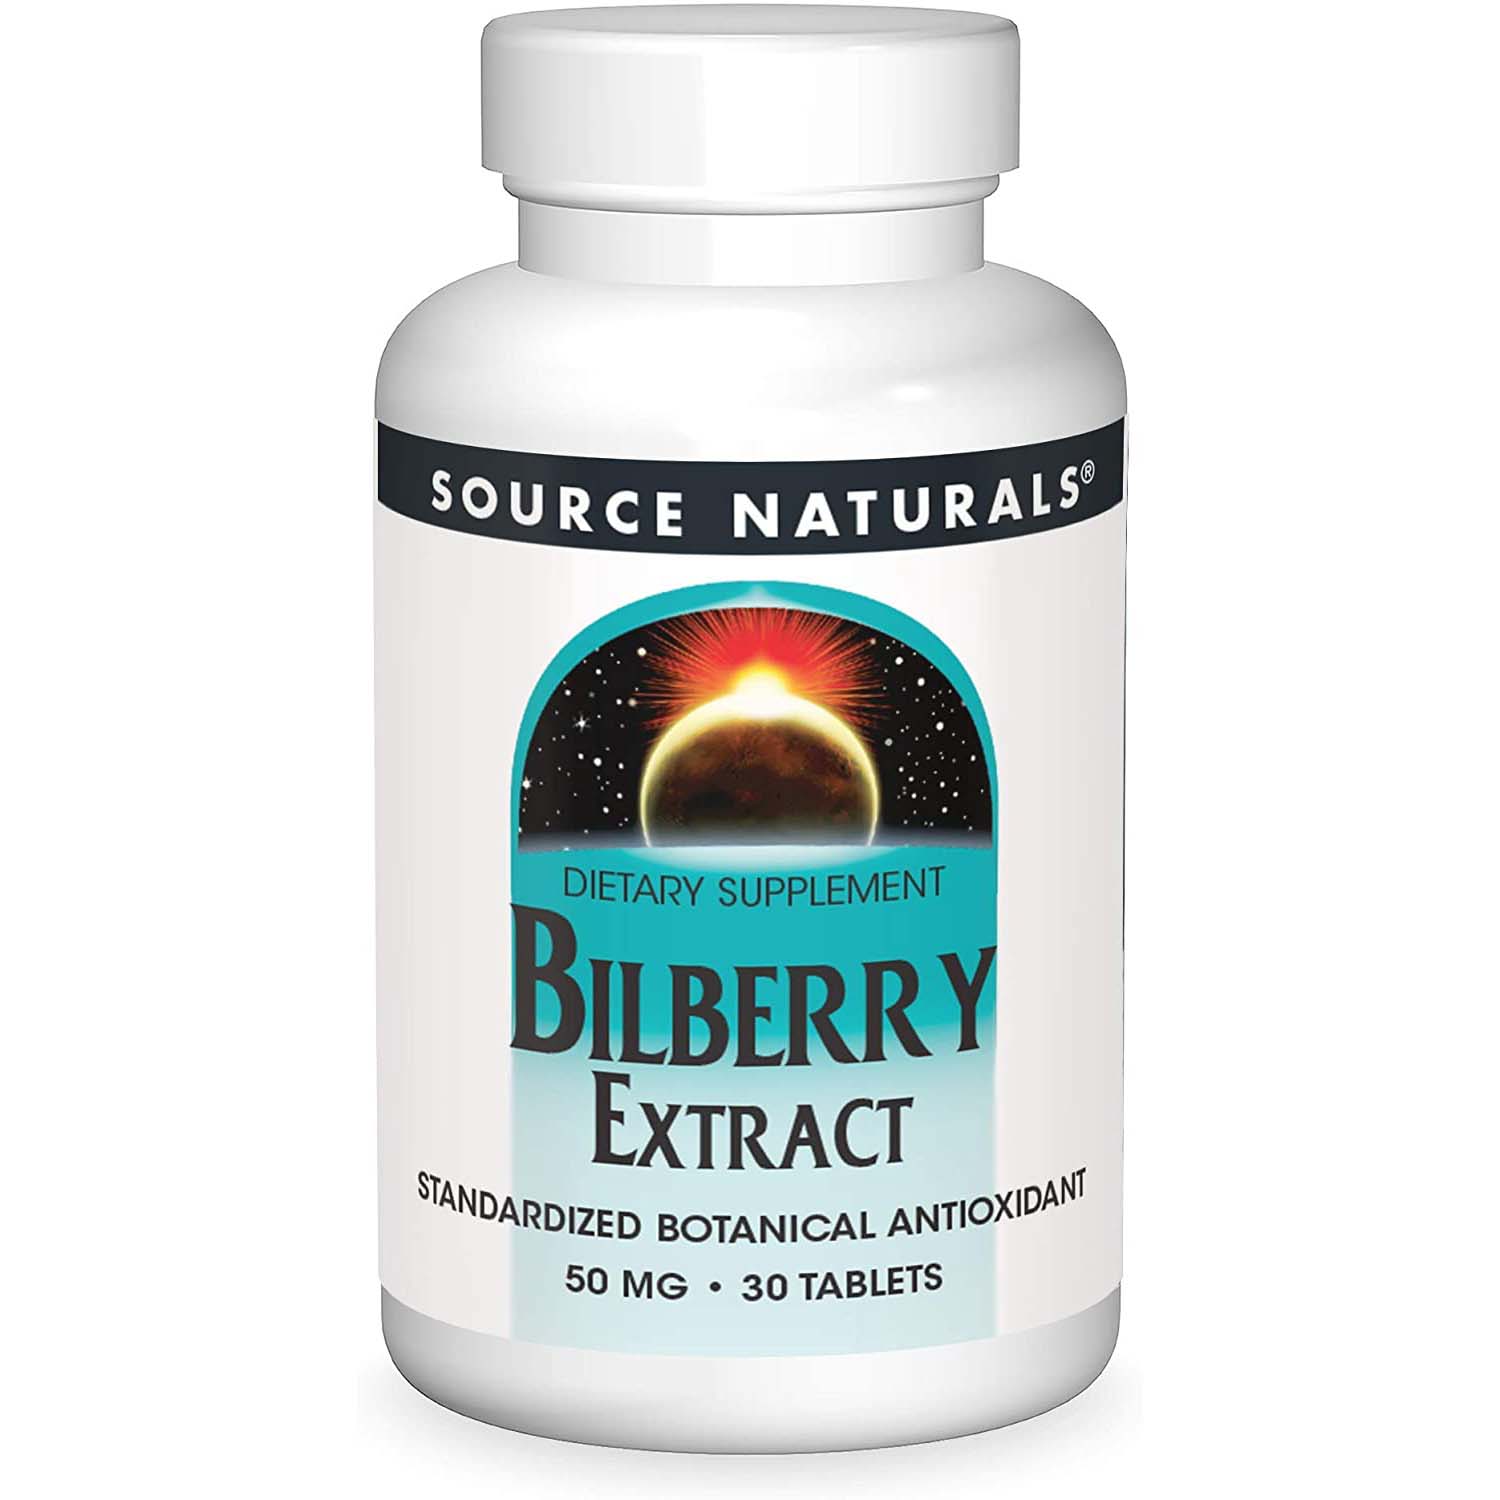 Source Naturals Bilberry Extract, 50 mg, 30 Tablets